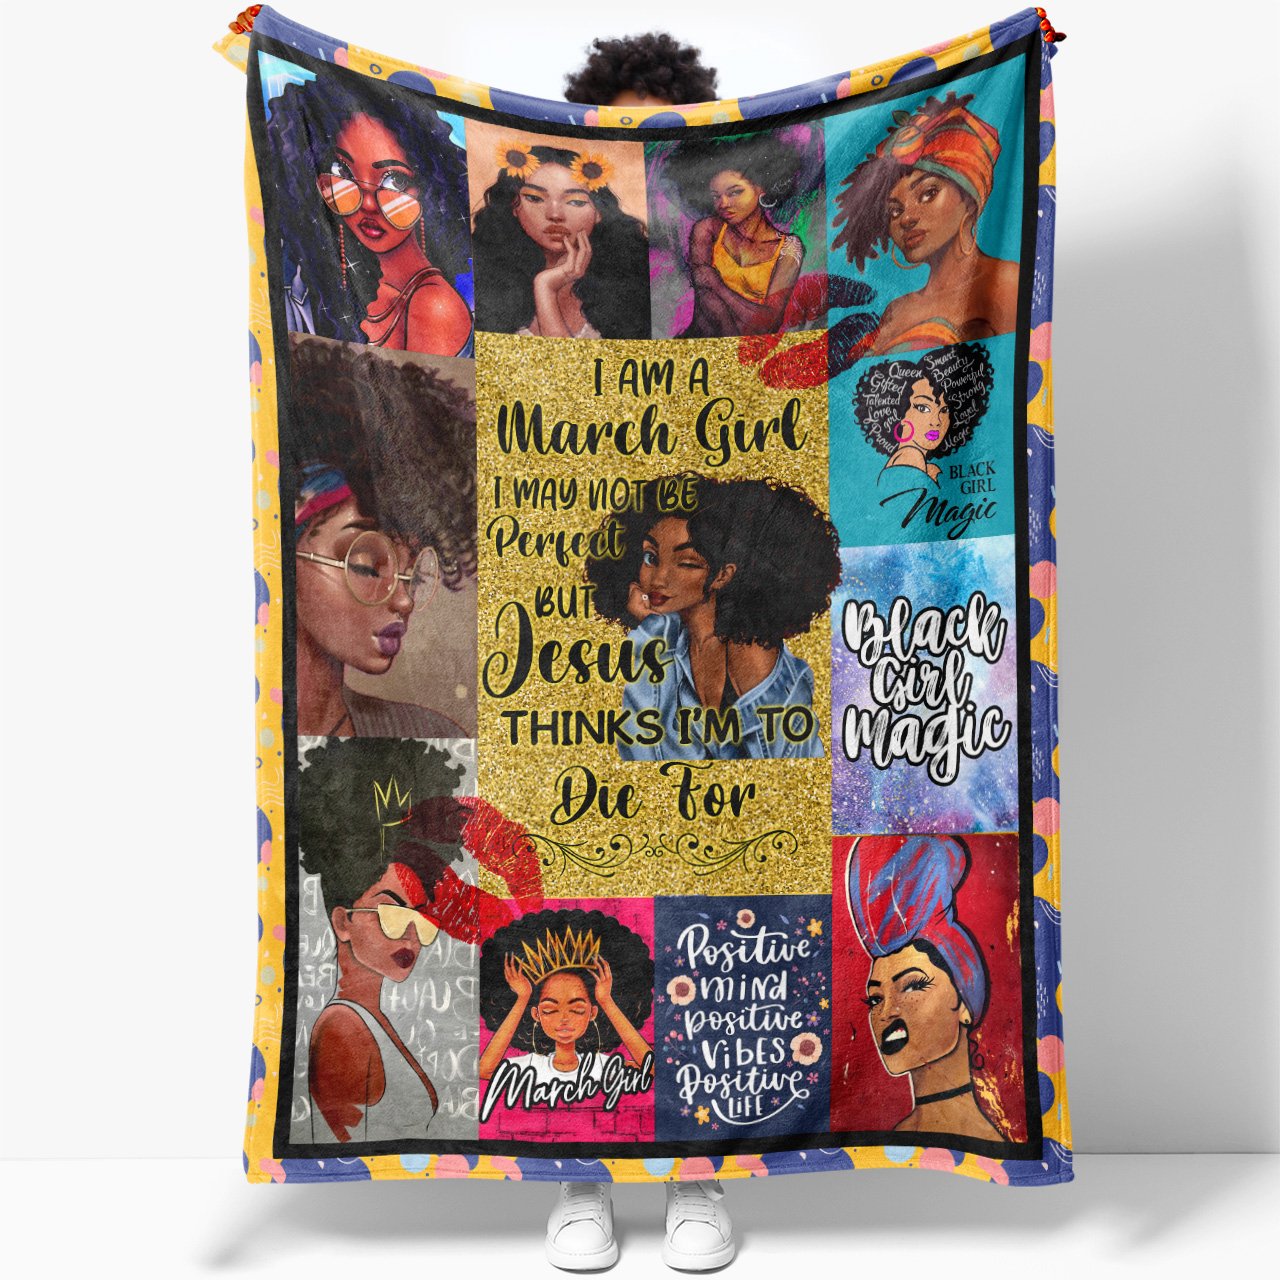 Blanket Birthday Gift Ideas For March Black Girl, Black Girl Magic, Not Be Perfect But Jesus Thinks I'm to Blanket for Black Daughter